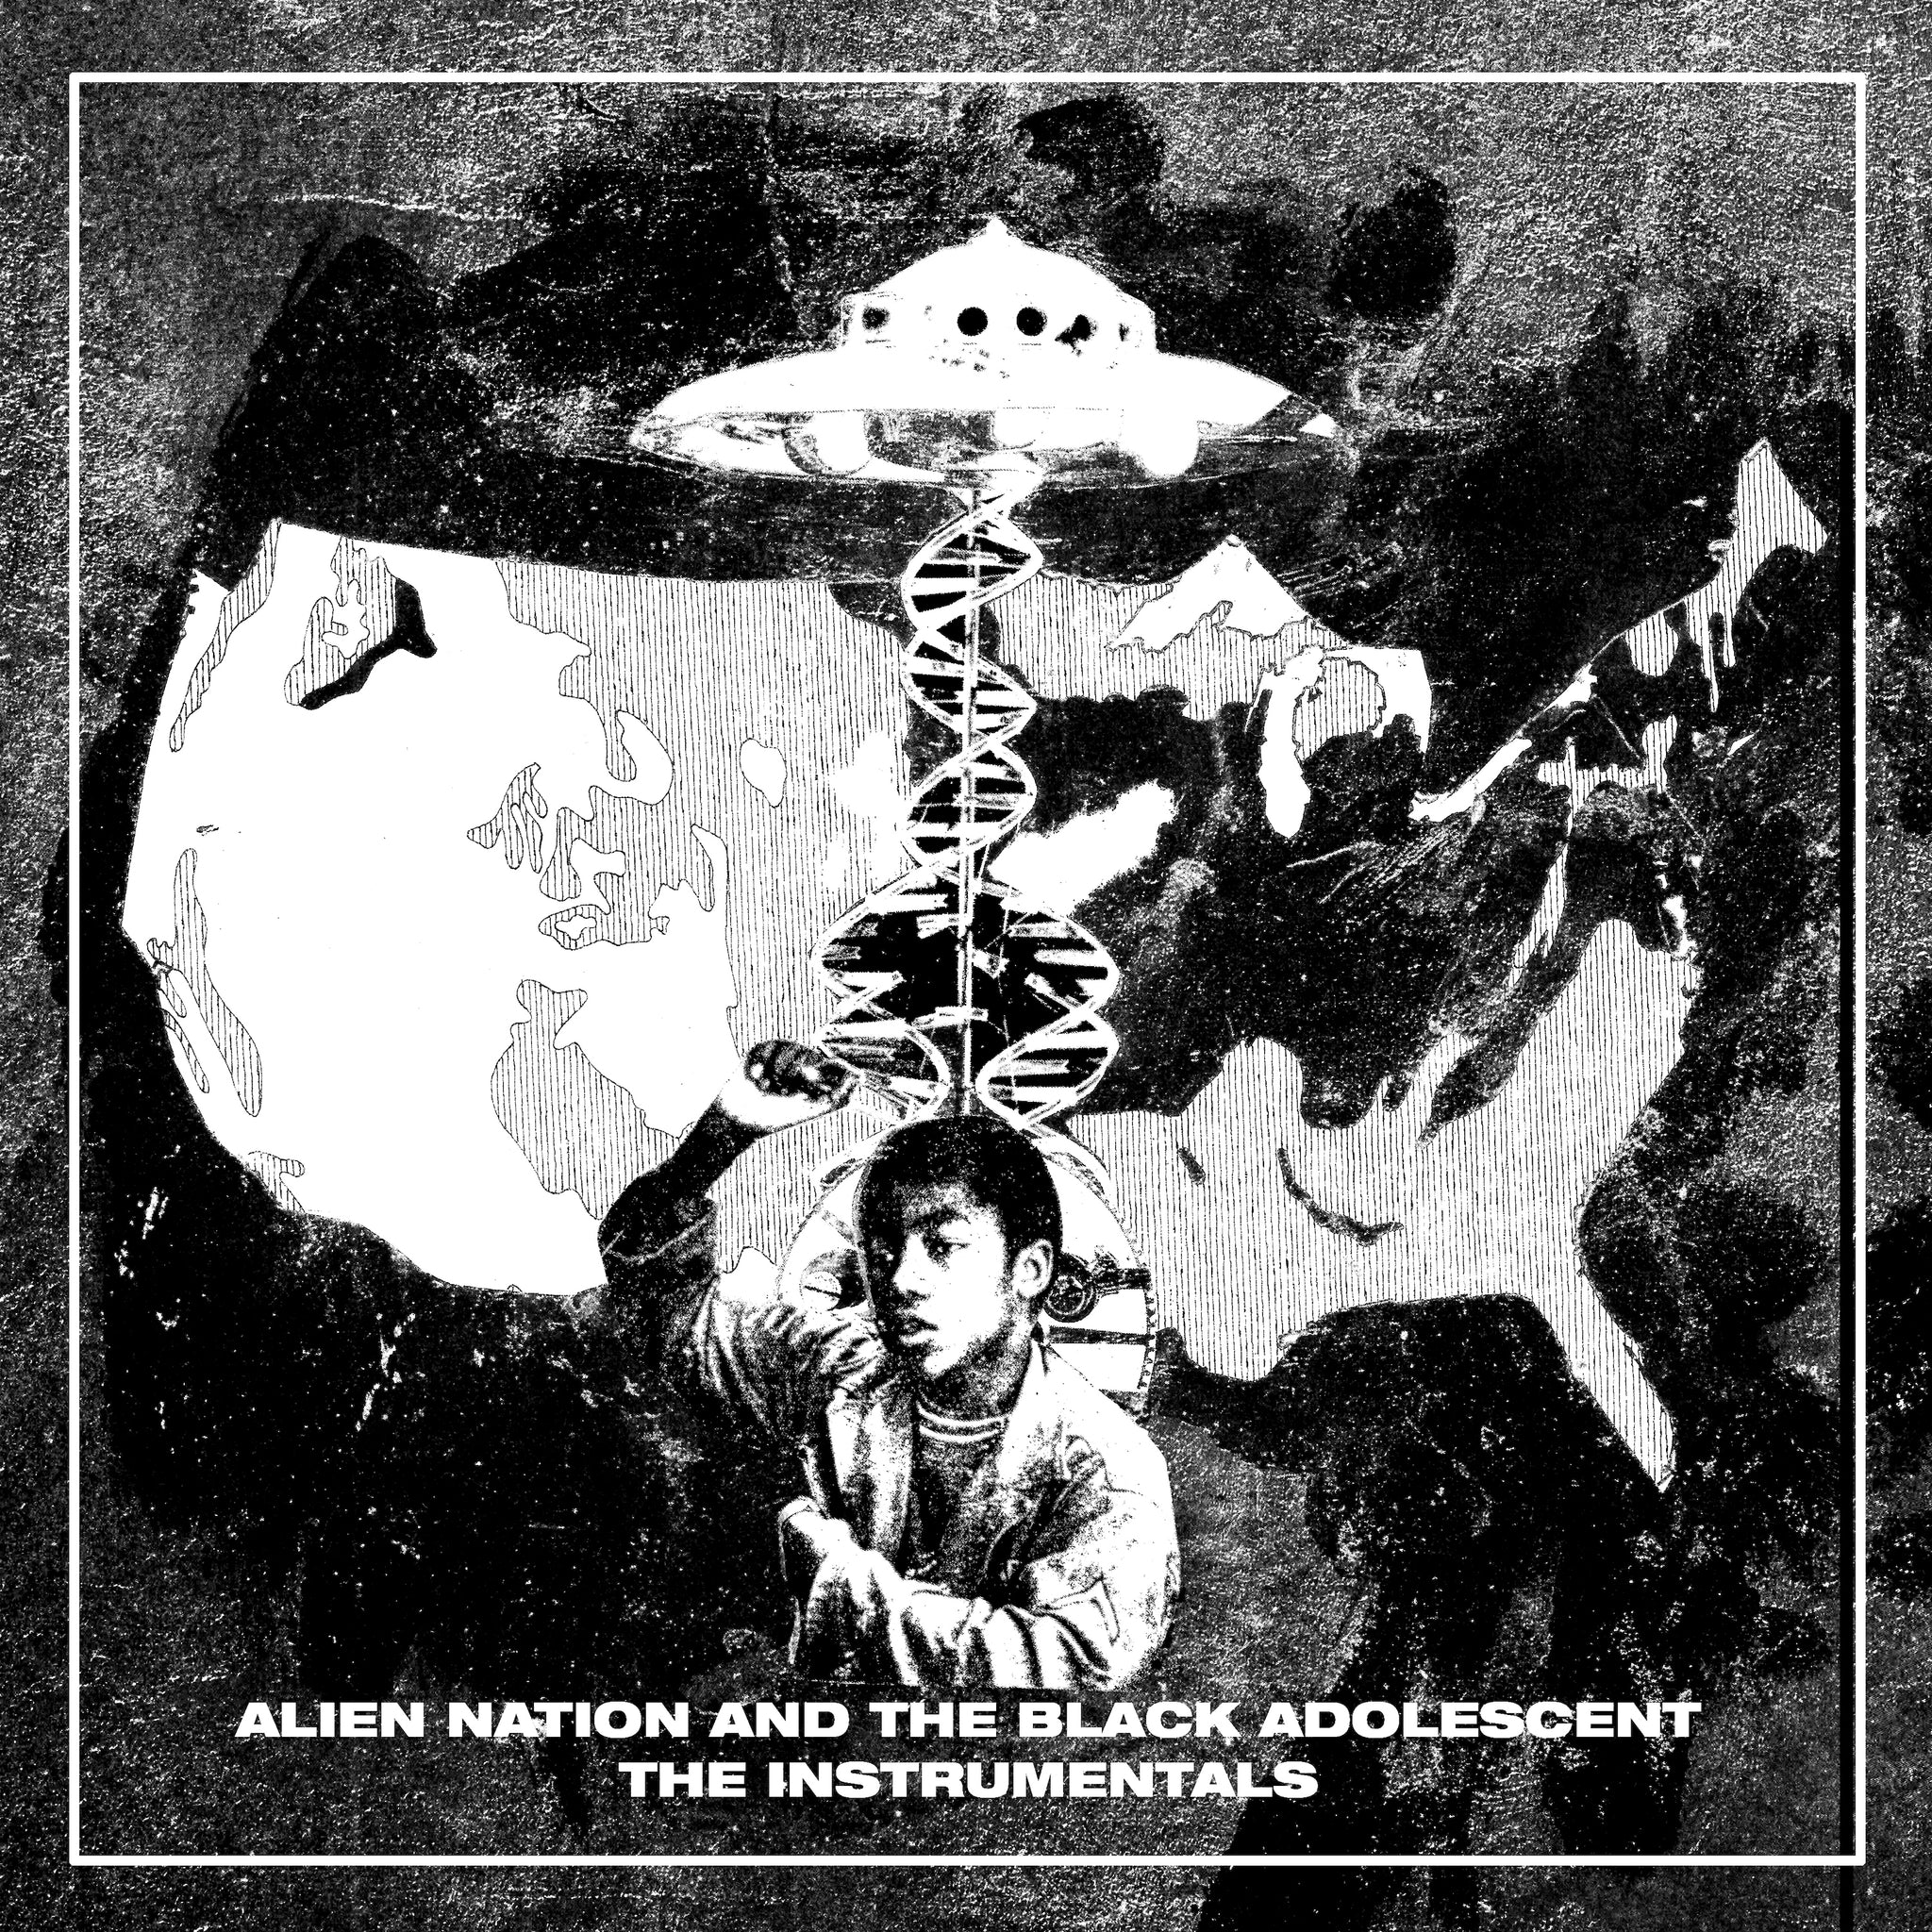 The Difference Machine - Alien Nation and the Black Adolescent (Instrumentals)